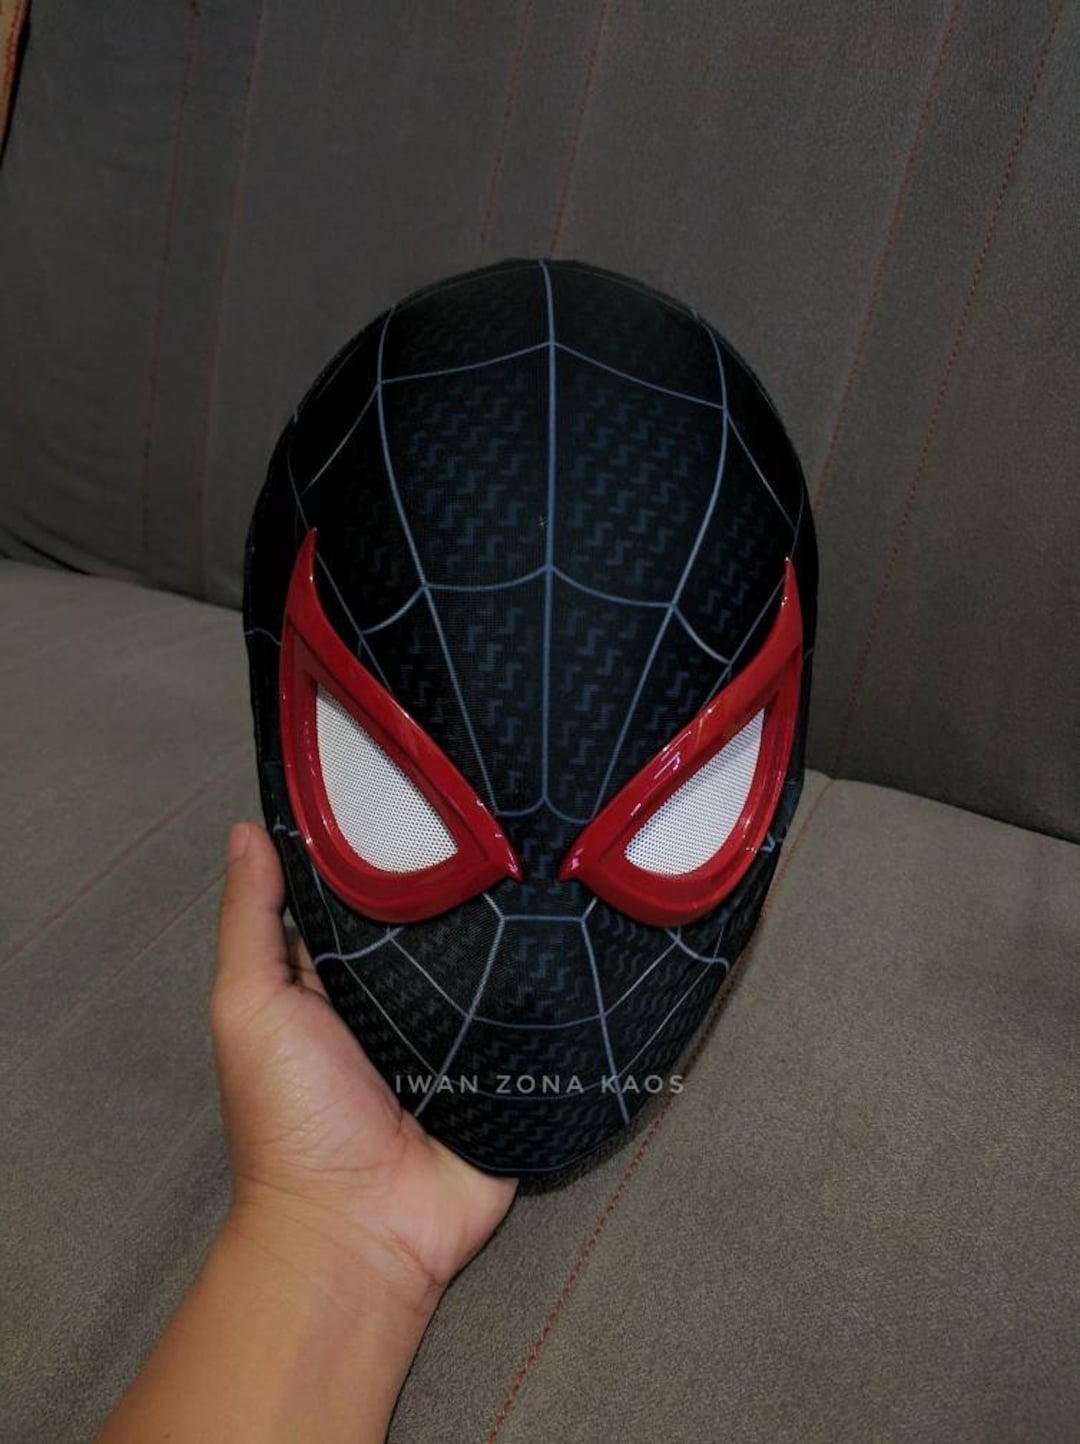 3 Pcs Kids Boy Spiderman Costume Cosplay Suit Kids Toy Spider-man  Capes,transmitter